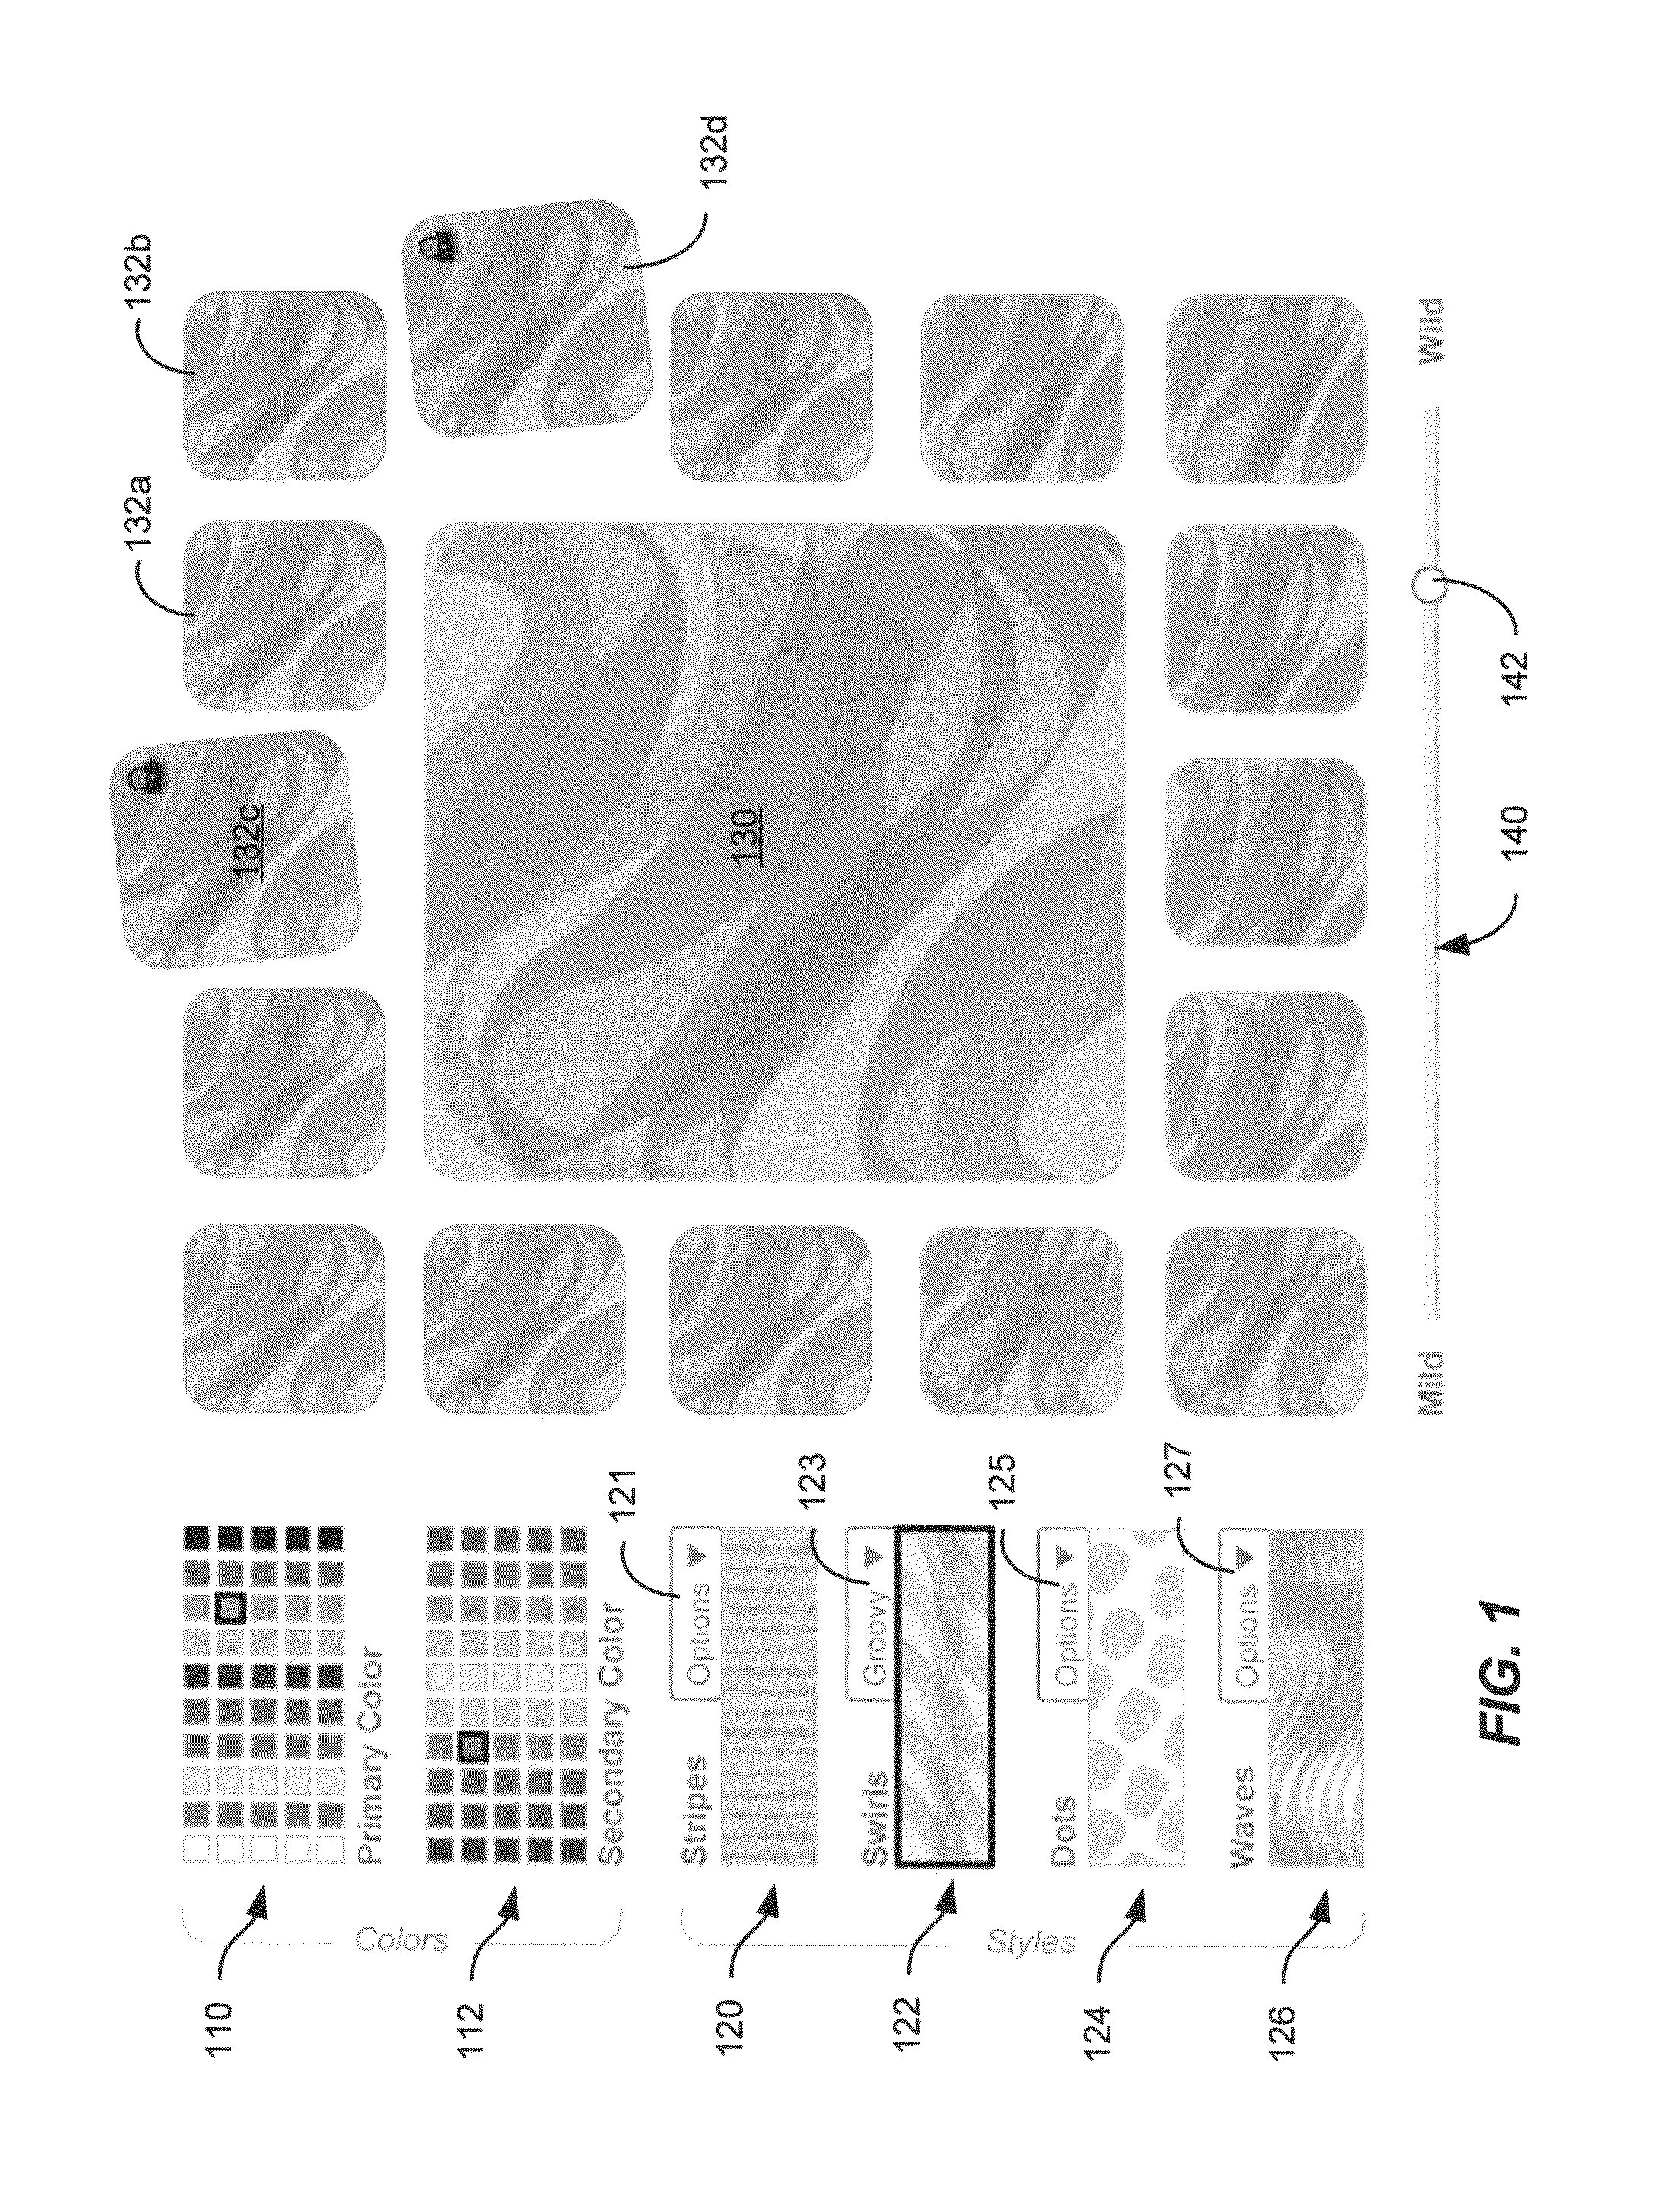 Method of operating a design generator for personalization of electronic devices